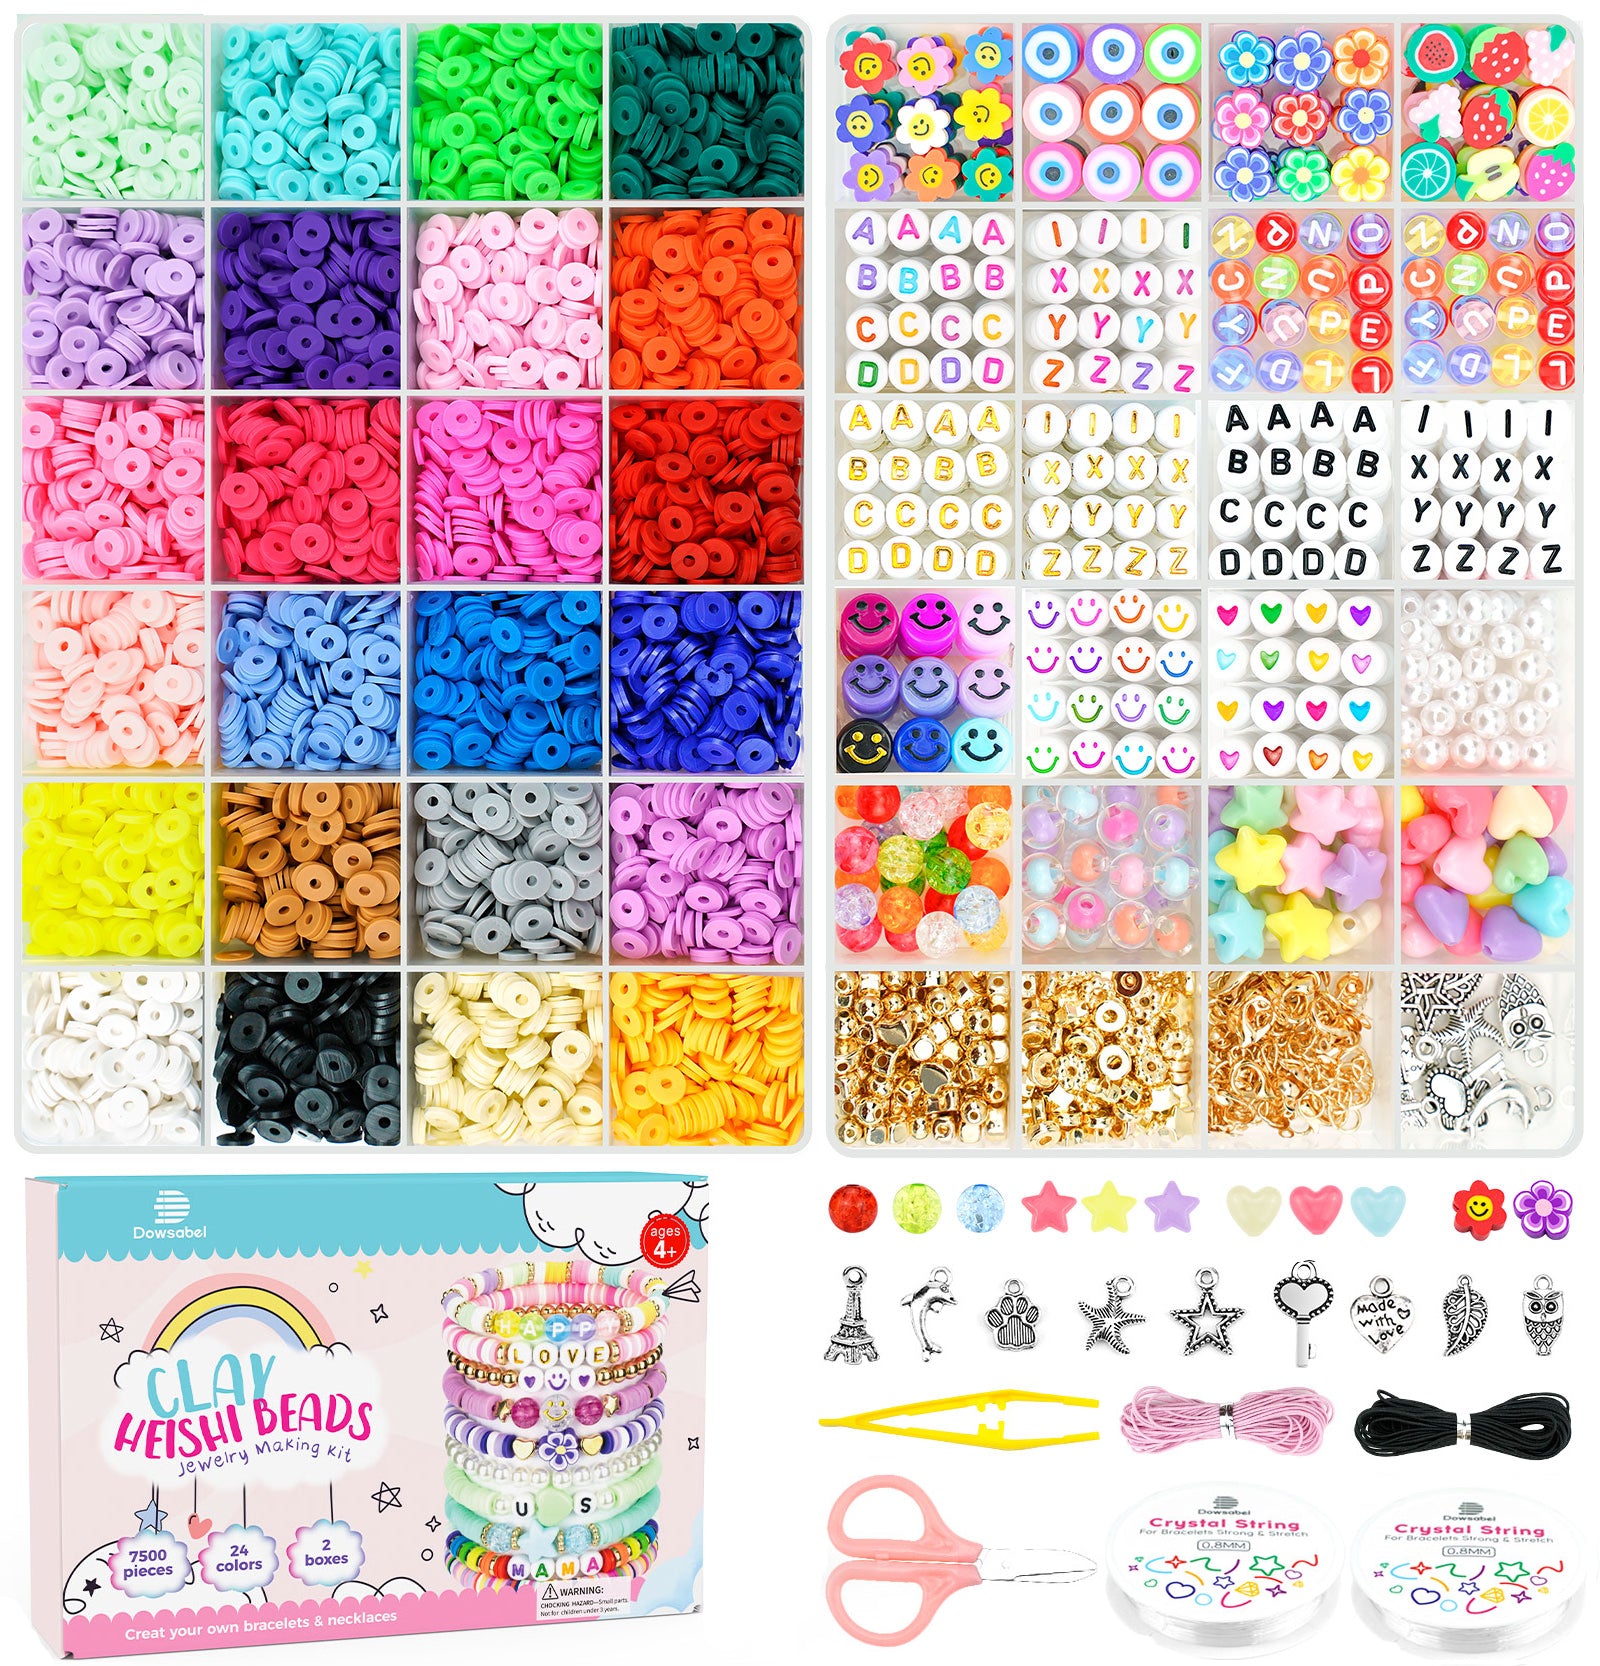 Dowsabel Bracelet Making Kit, Beads for Bracelets Making Pony Beads Polymer Clay Beads Smile Face Beads Letter Beads for Jewelry Making, DIY Arts